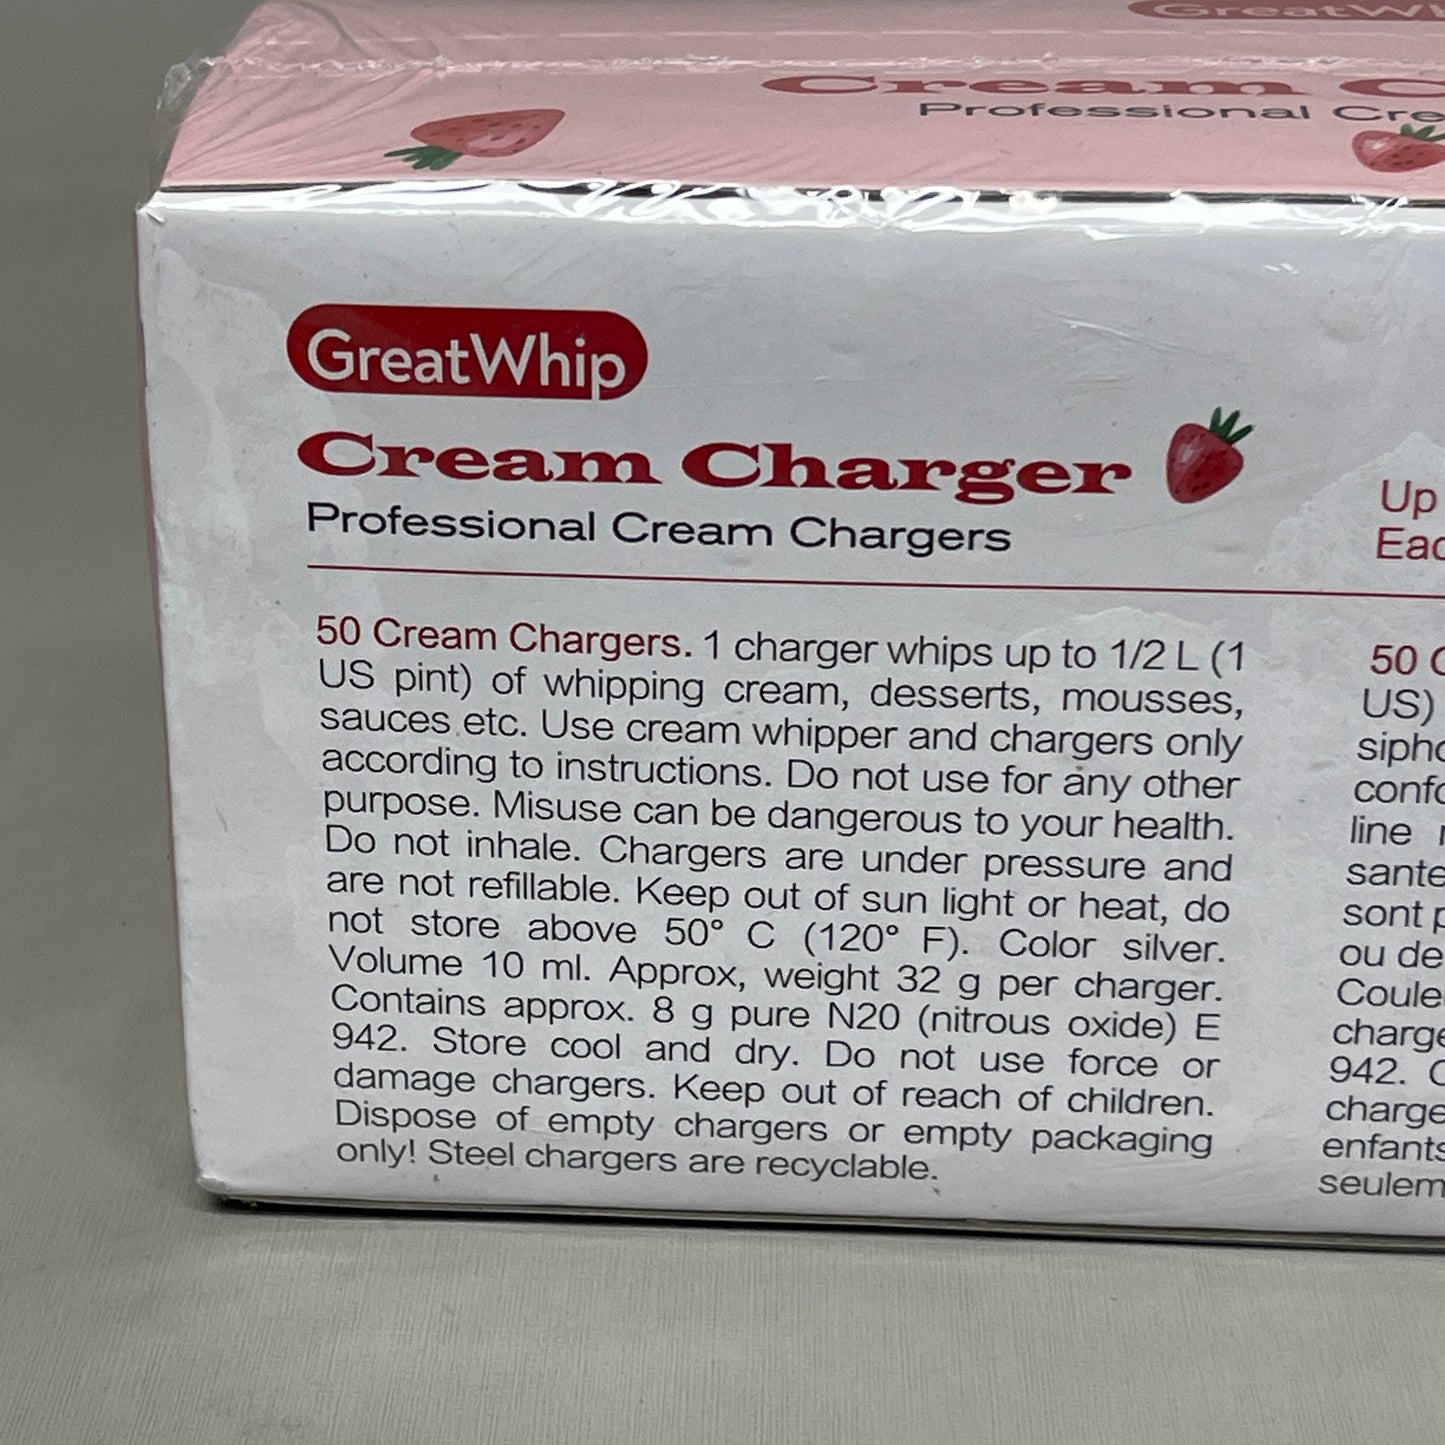 GREATWHIP Strawberry Professional Cream Chargers 50-PACK Best By 09/26 (New)